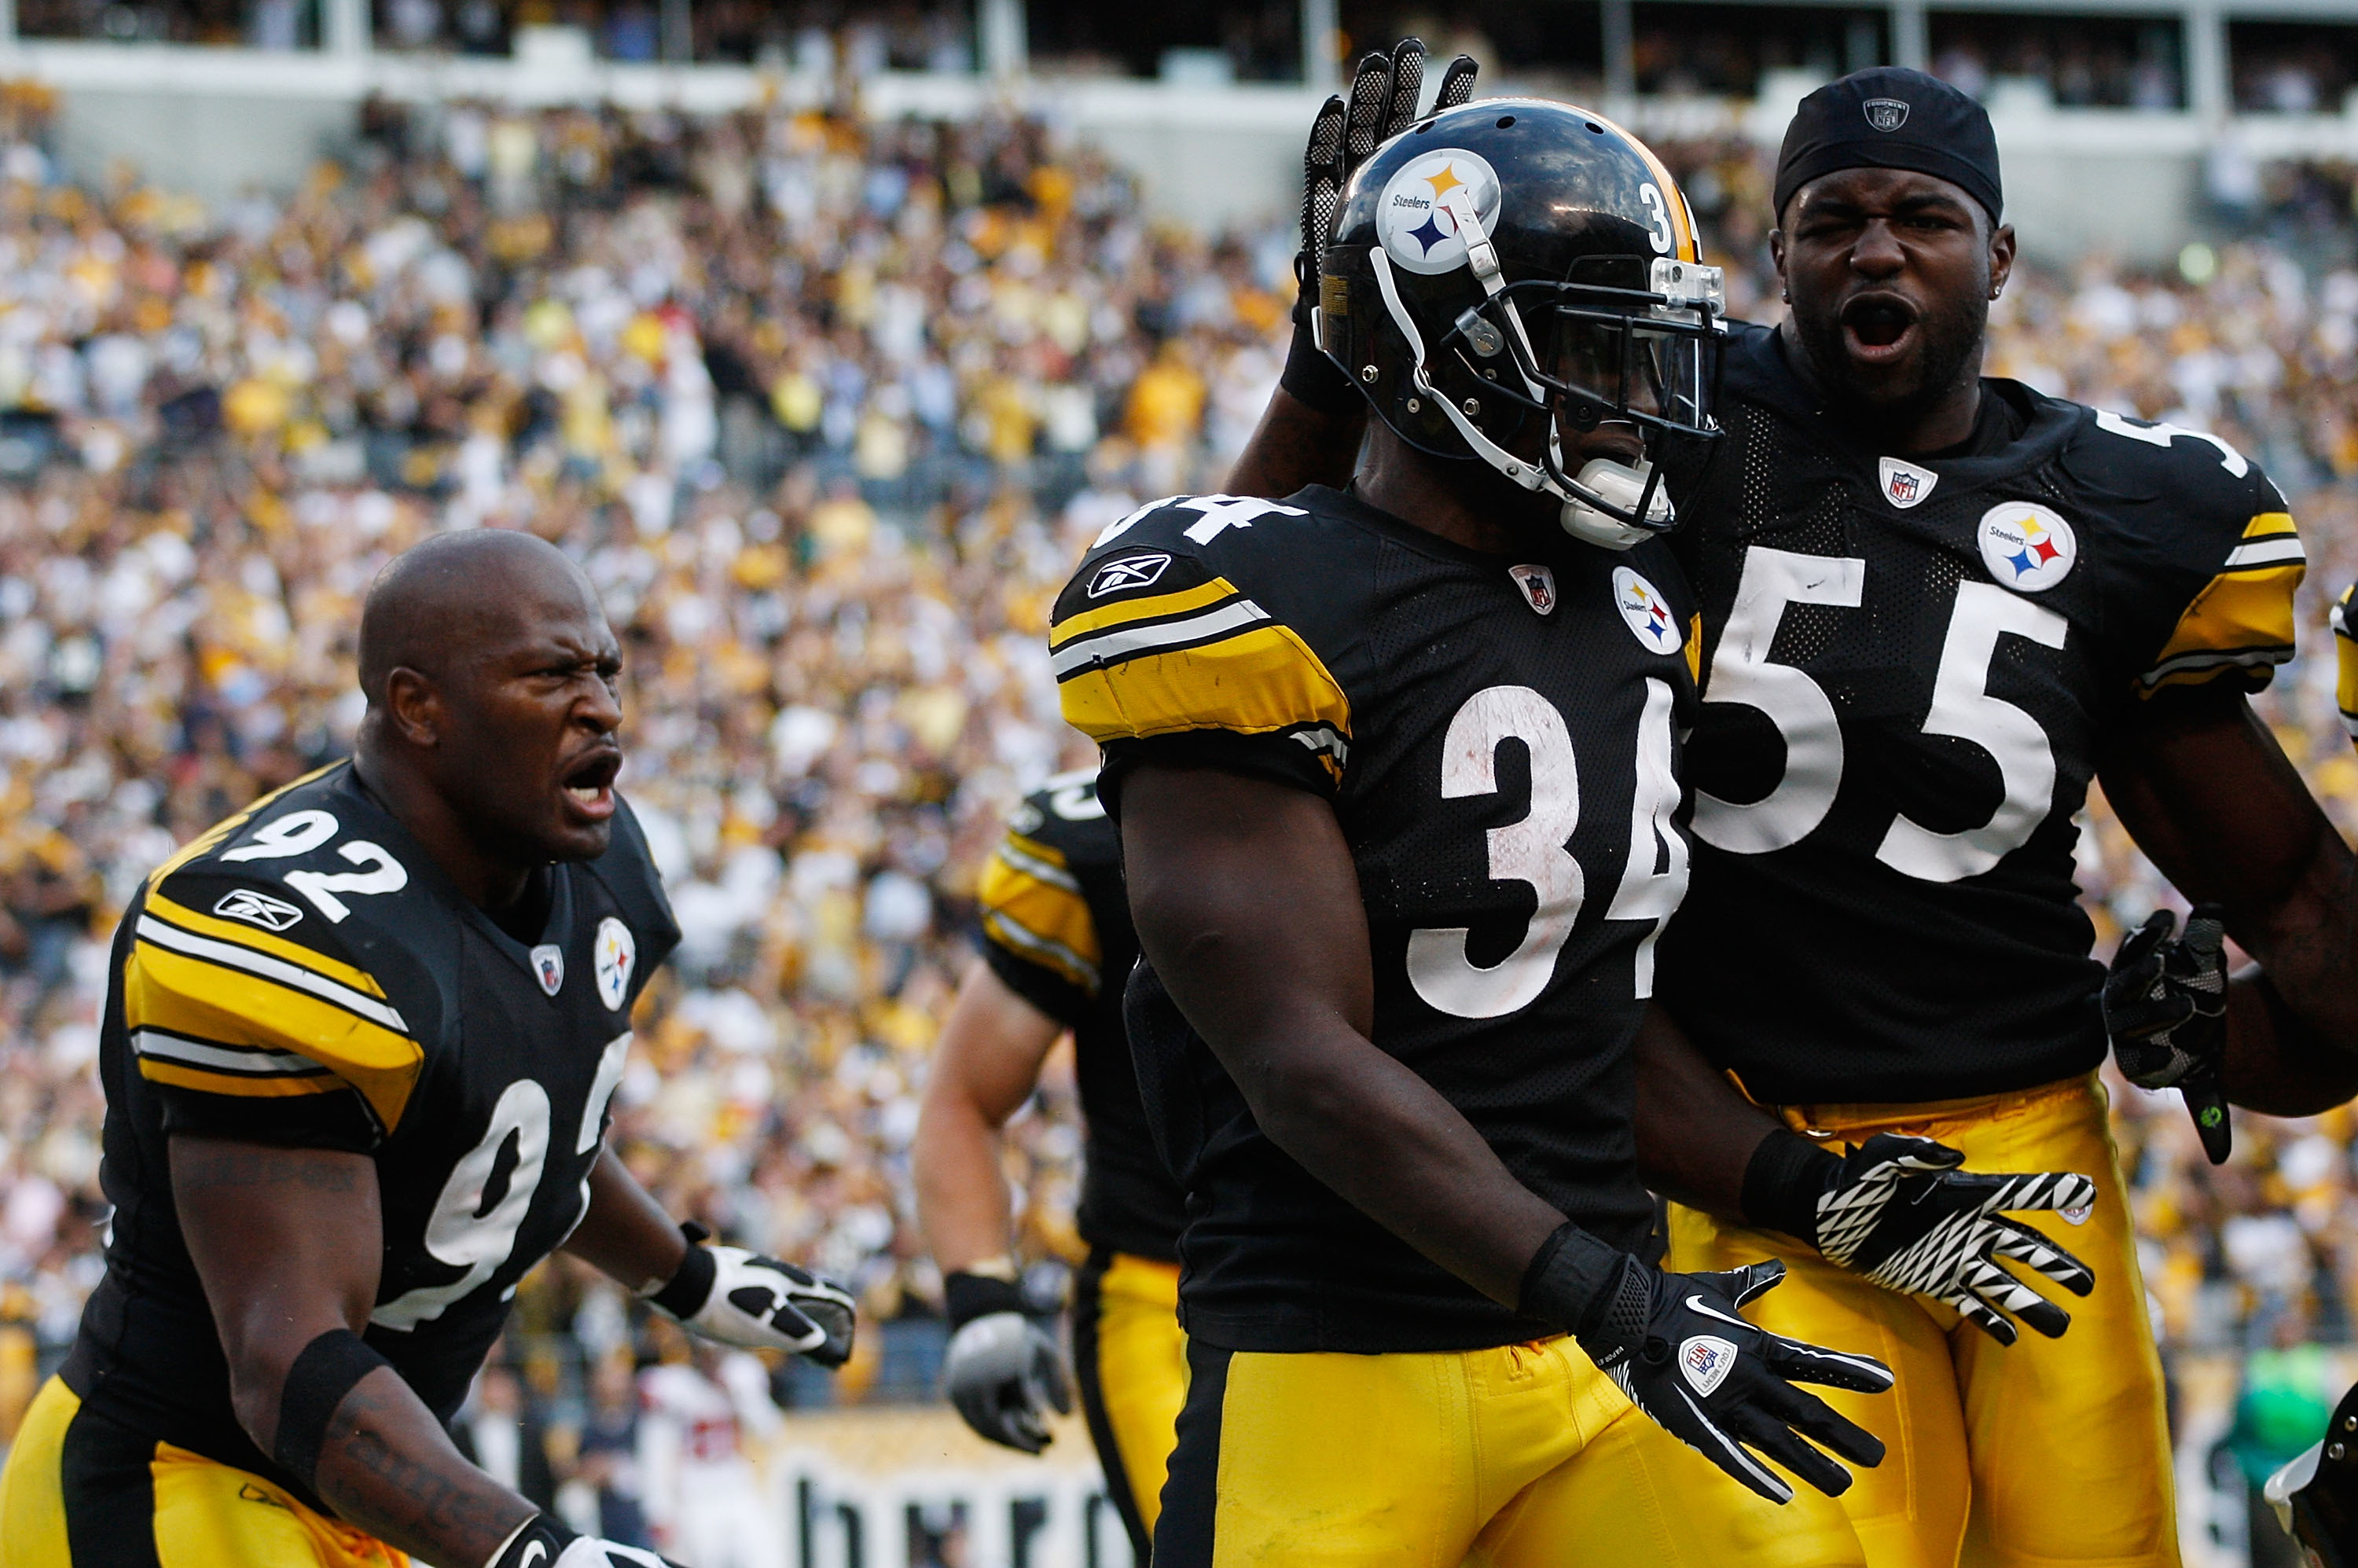 PITTSBURGH - SEPTEMBER 12:  Rashard Mendenhall #34 of the Pittsburgh Steelers celebrates with teammates Stevenson Sylvester #55 and James Harrison #92 after scoring the game winning touchdown on a 50-yard run against the Atlanta Falcons during the NFL sea